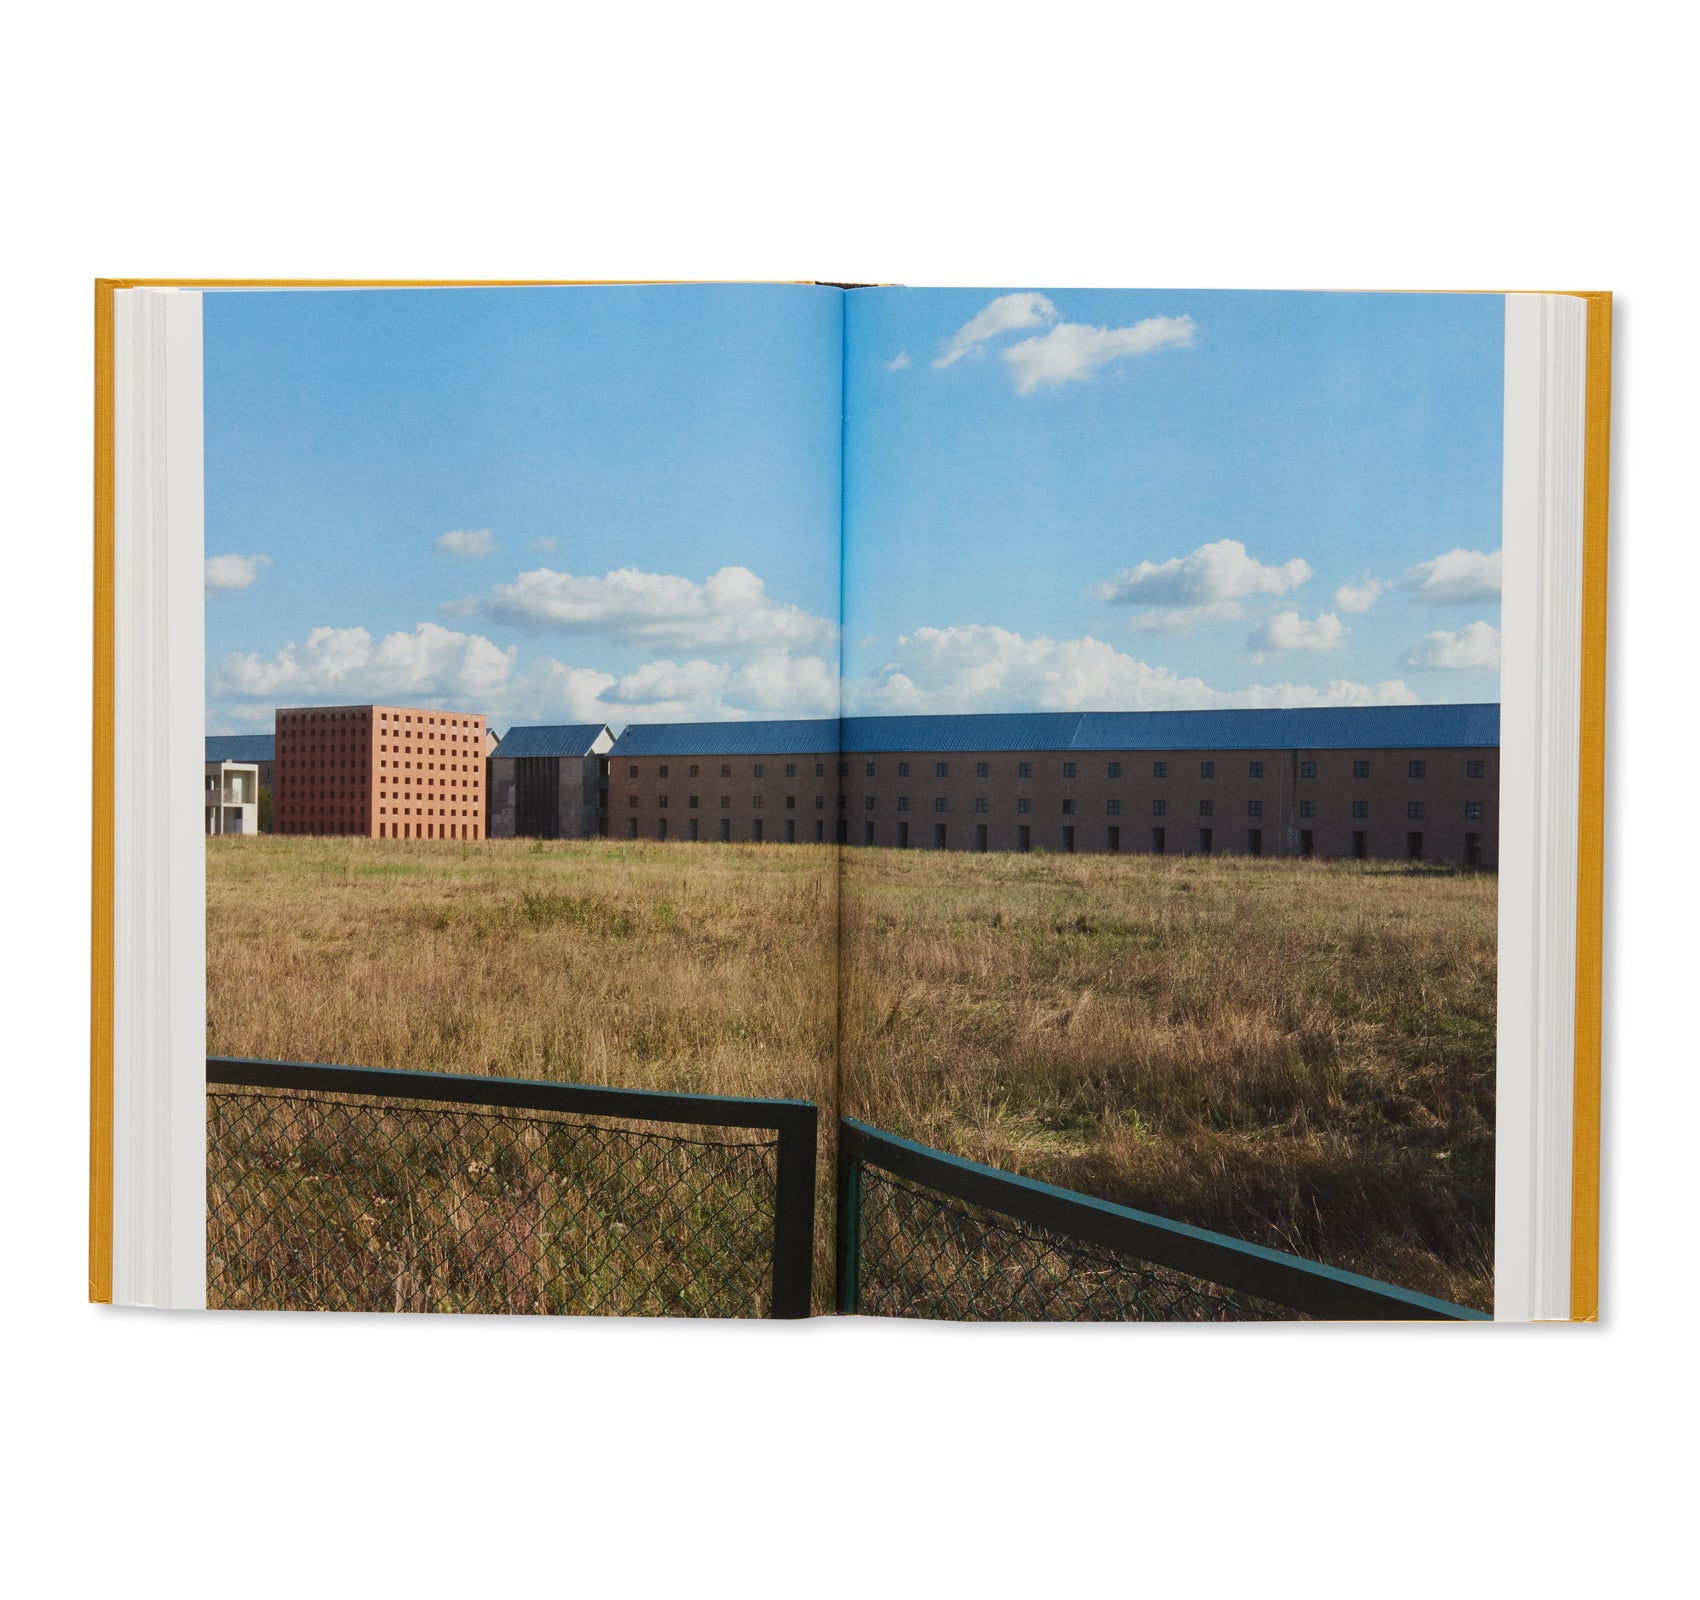 THE URBAN FACT. A REFERENCE BOOK ON ALDO ROSSI by Aldo Rossi